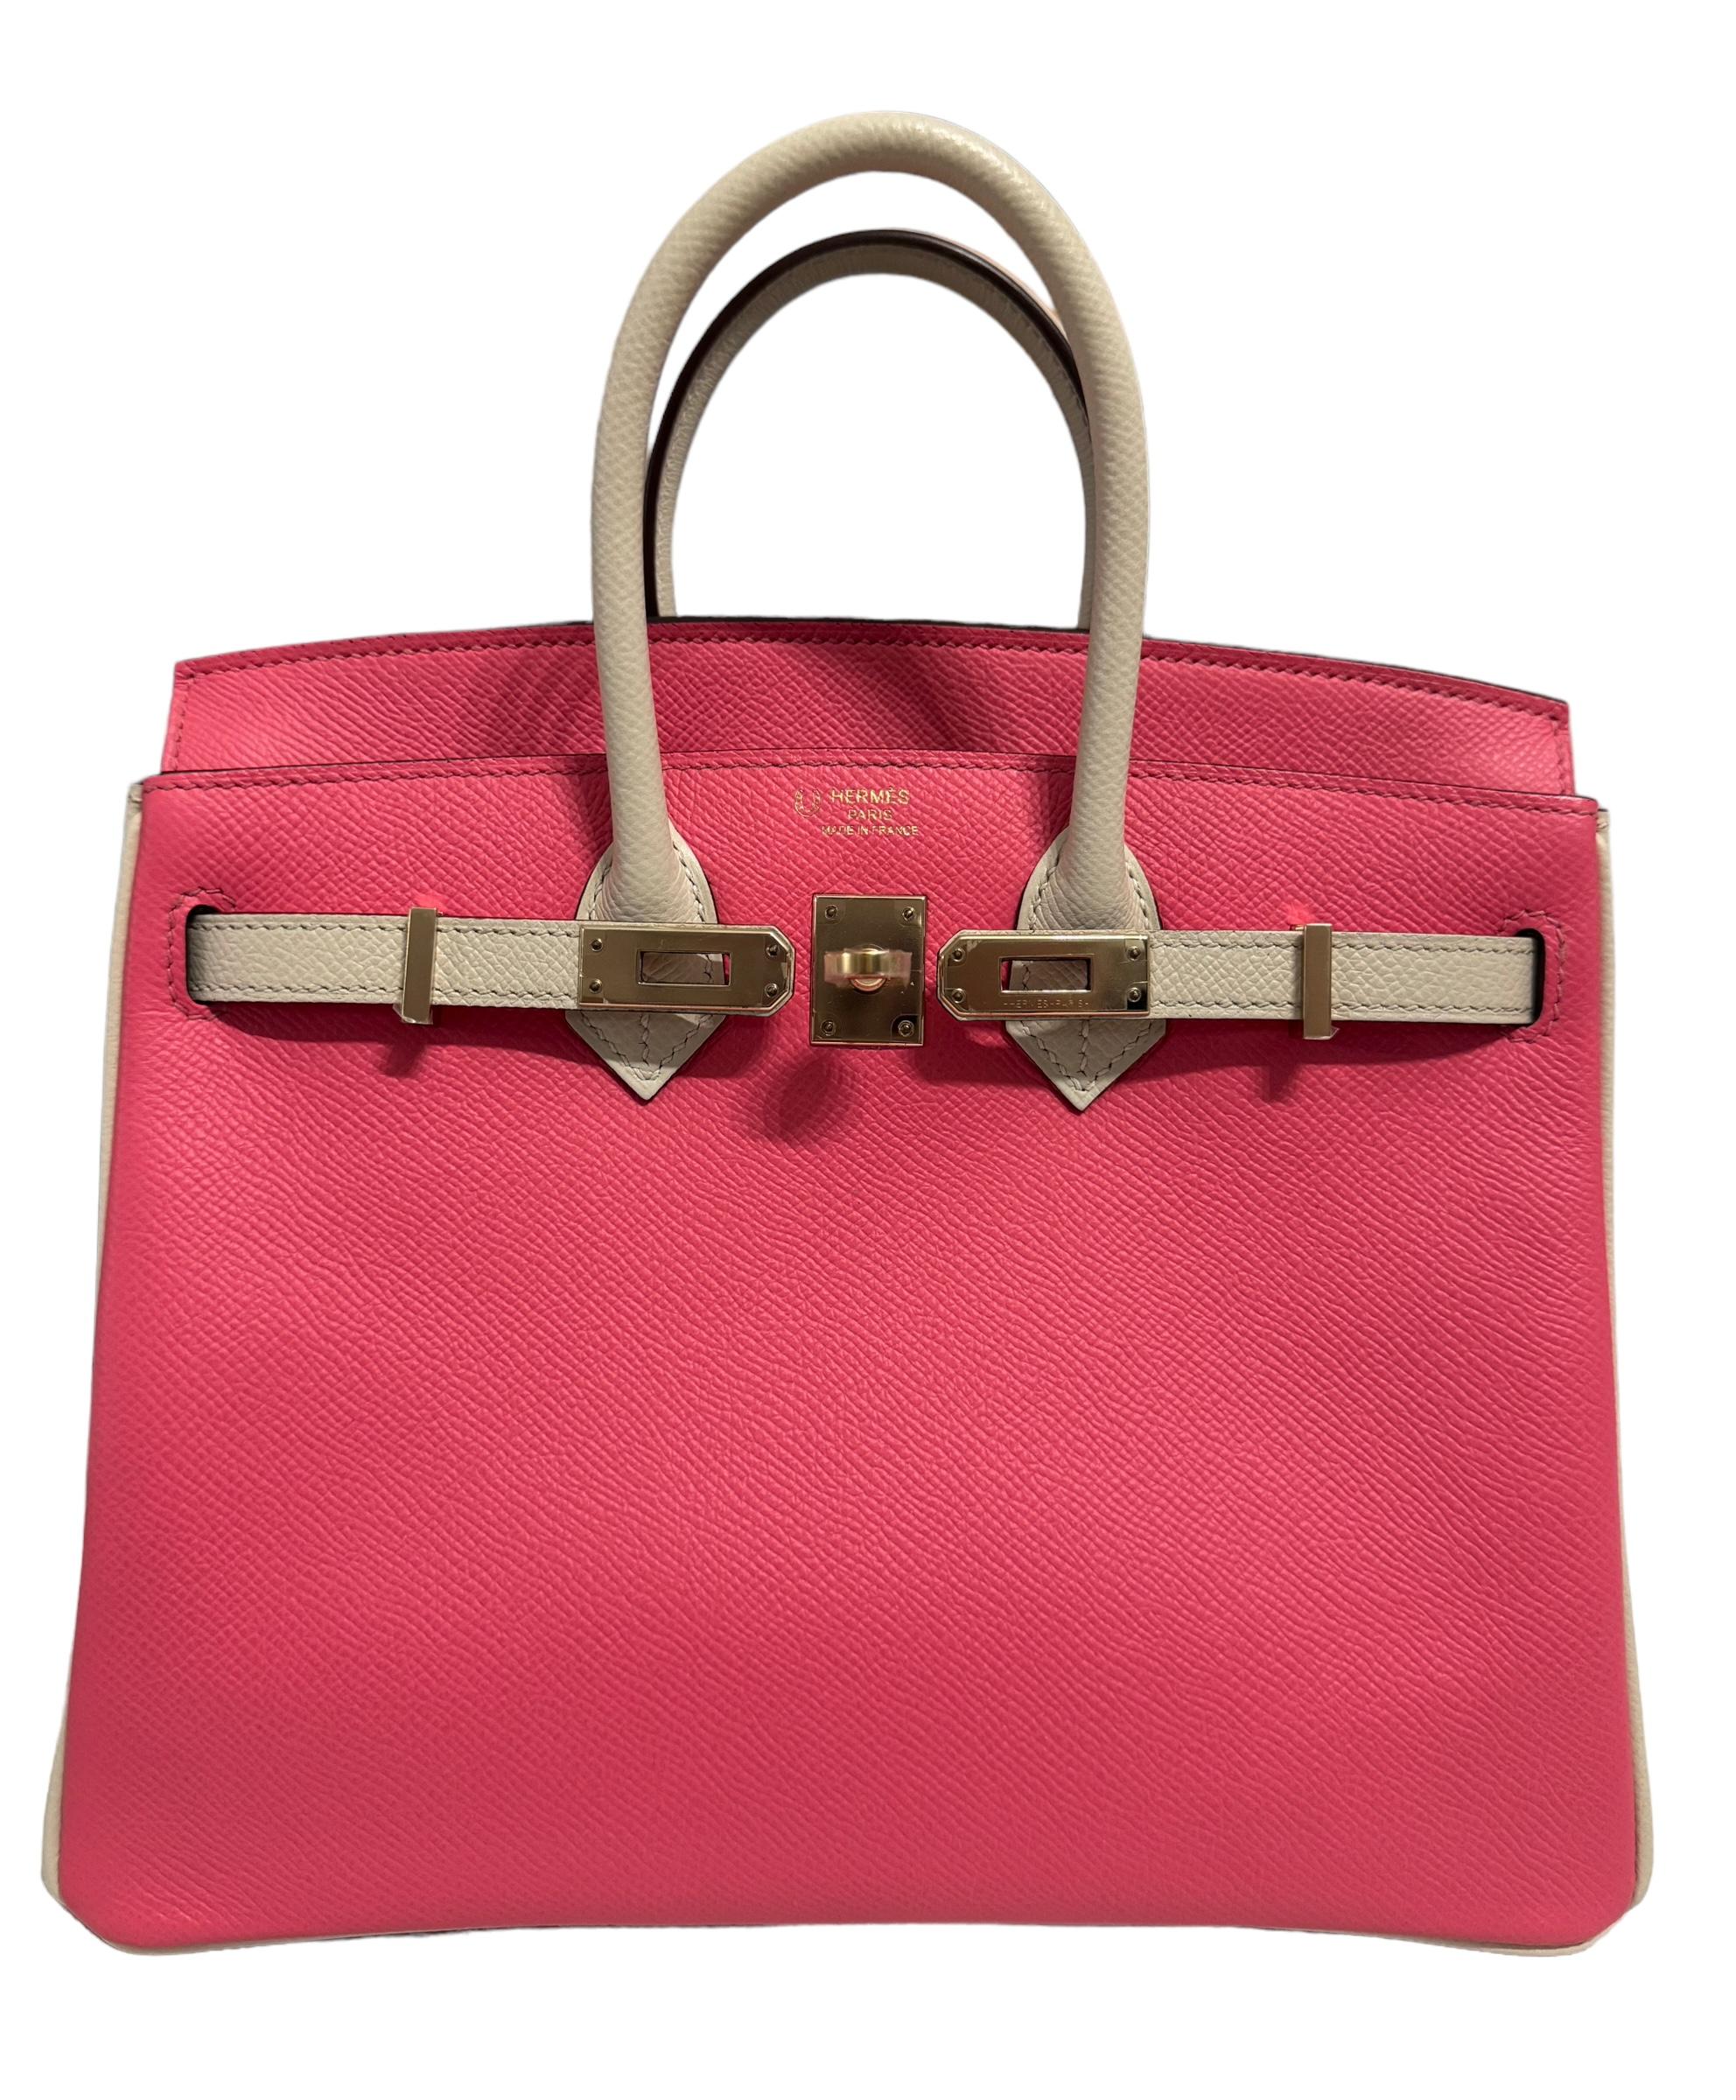 Hermes Birkin 25 Special Order Rose Azalee Pink Craie Epsom Leather Permabrass In Excellent Condition For Sale In Miami, FL